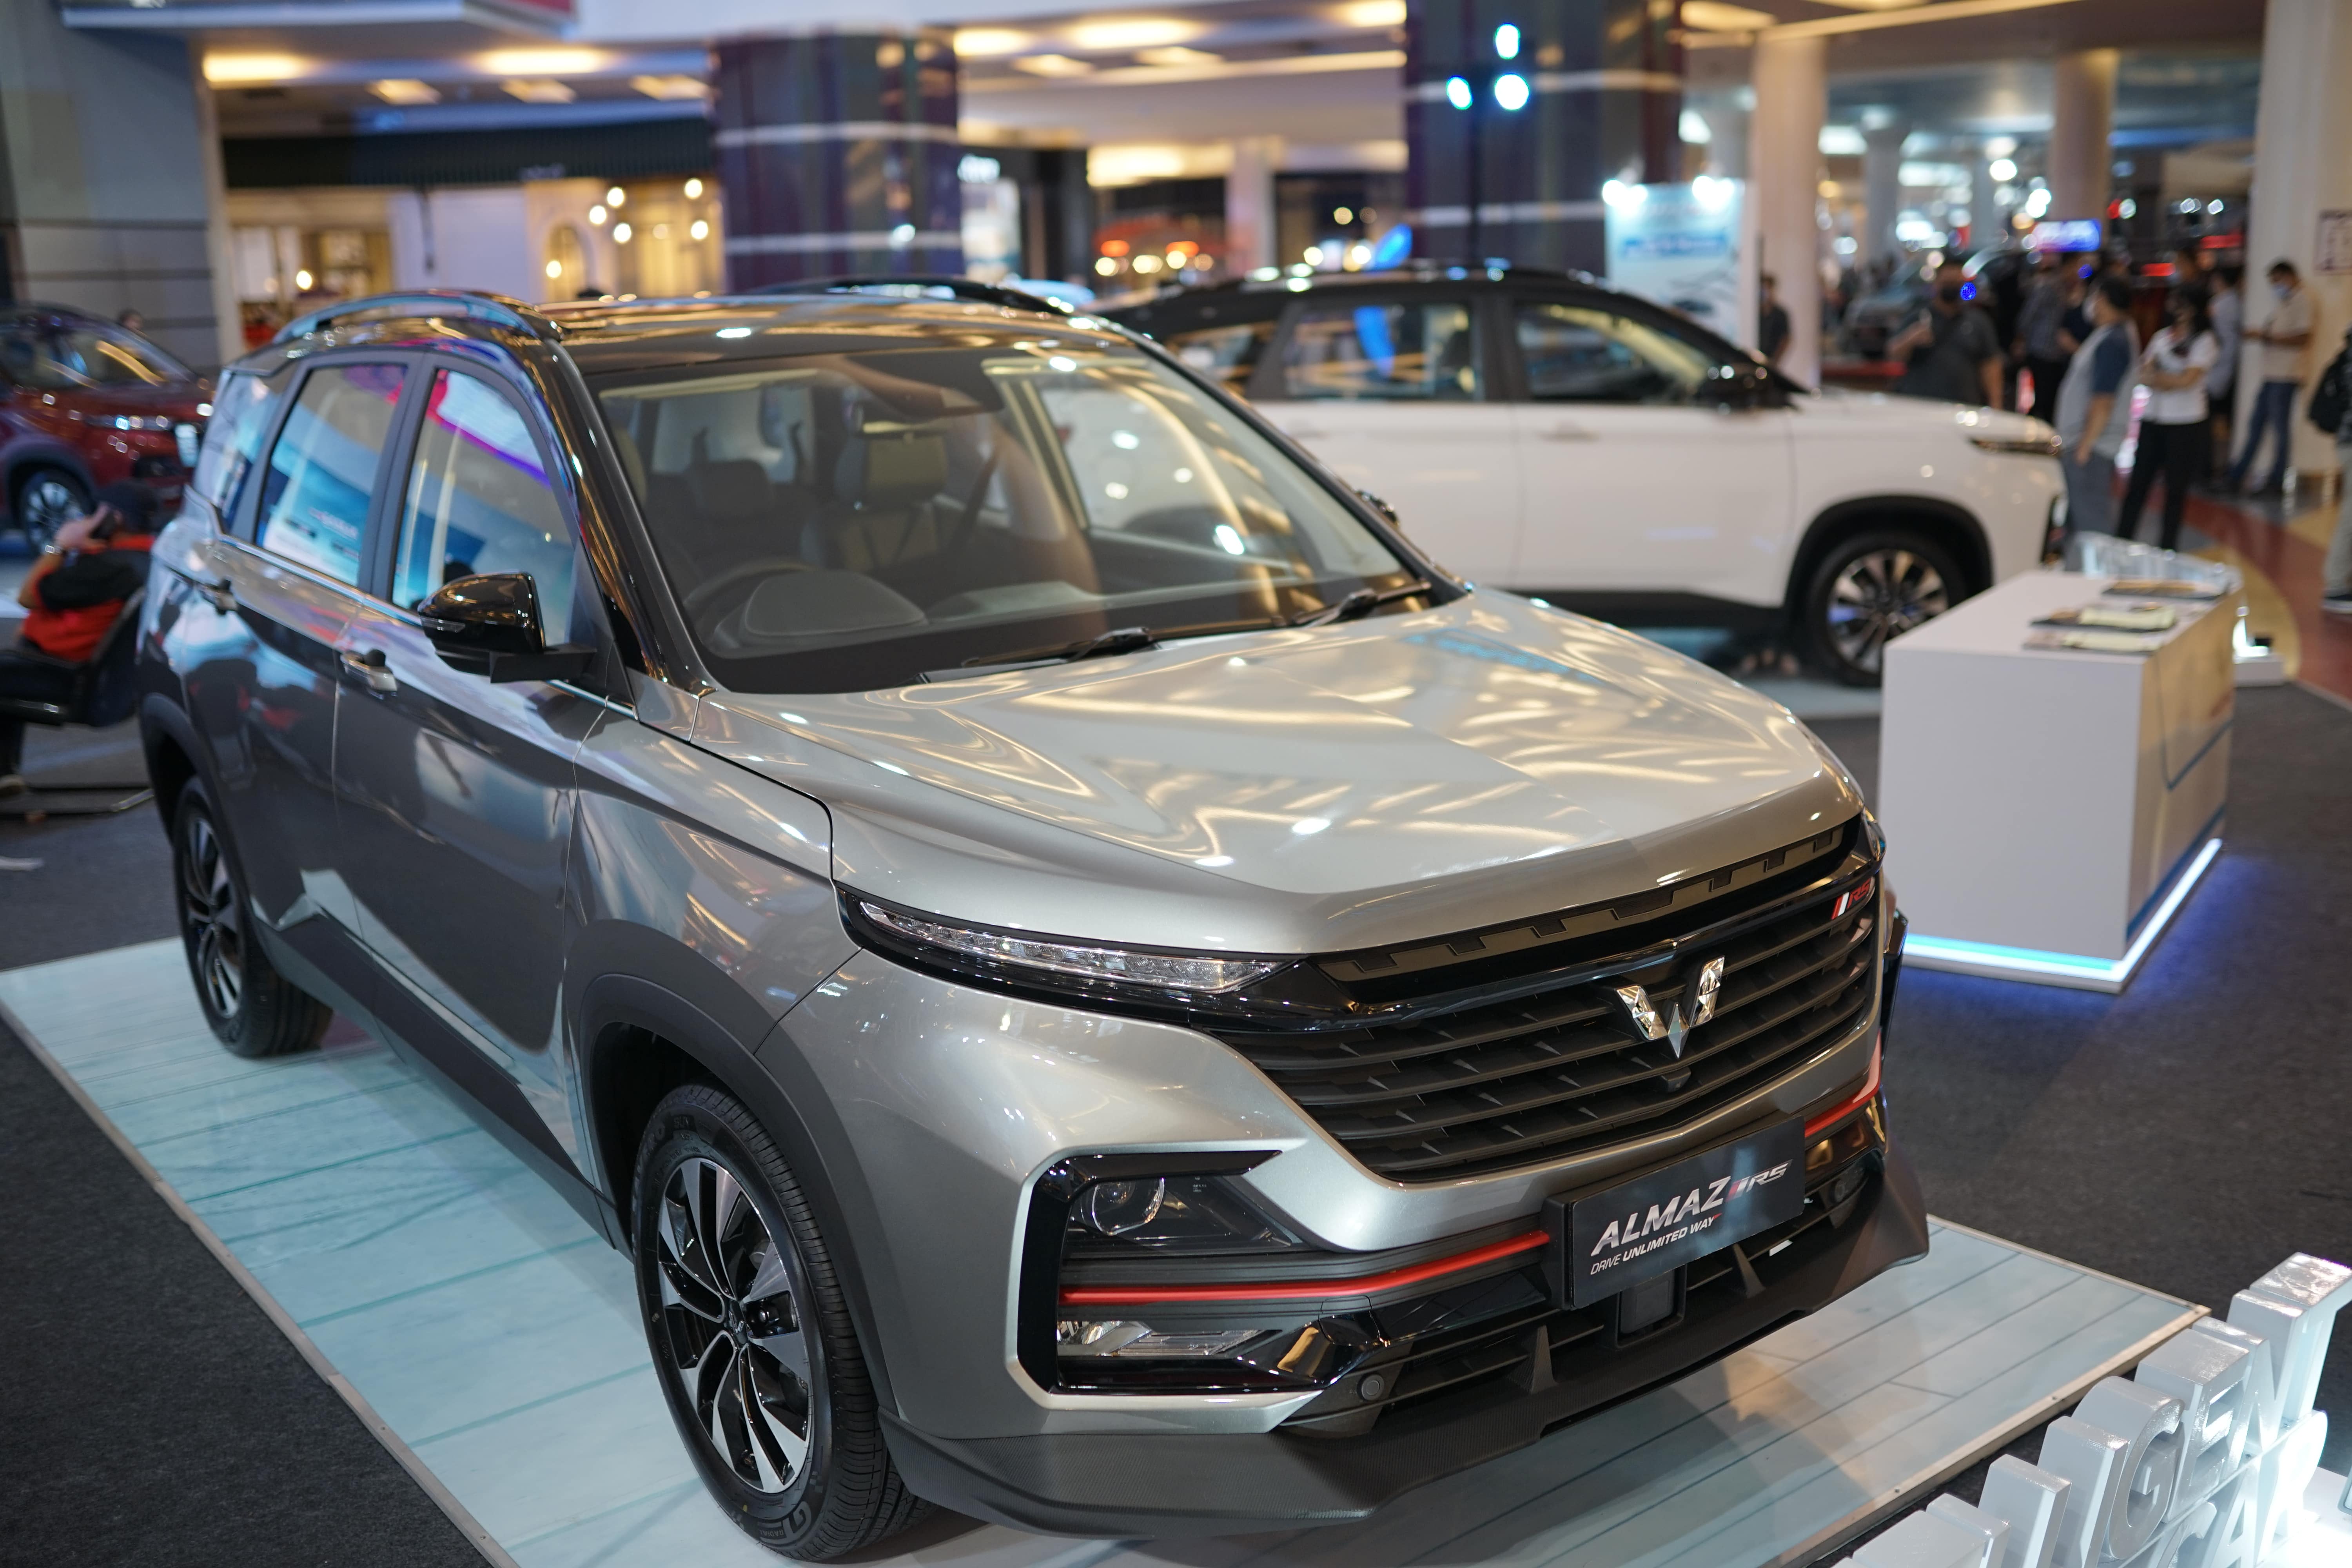 Image Wuling Almaz RS is Now Officially on The Road in Makassar